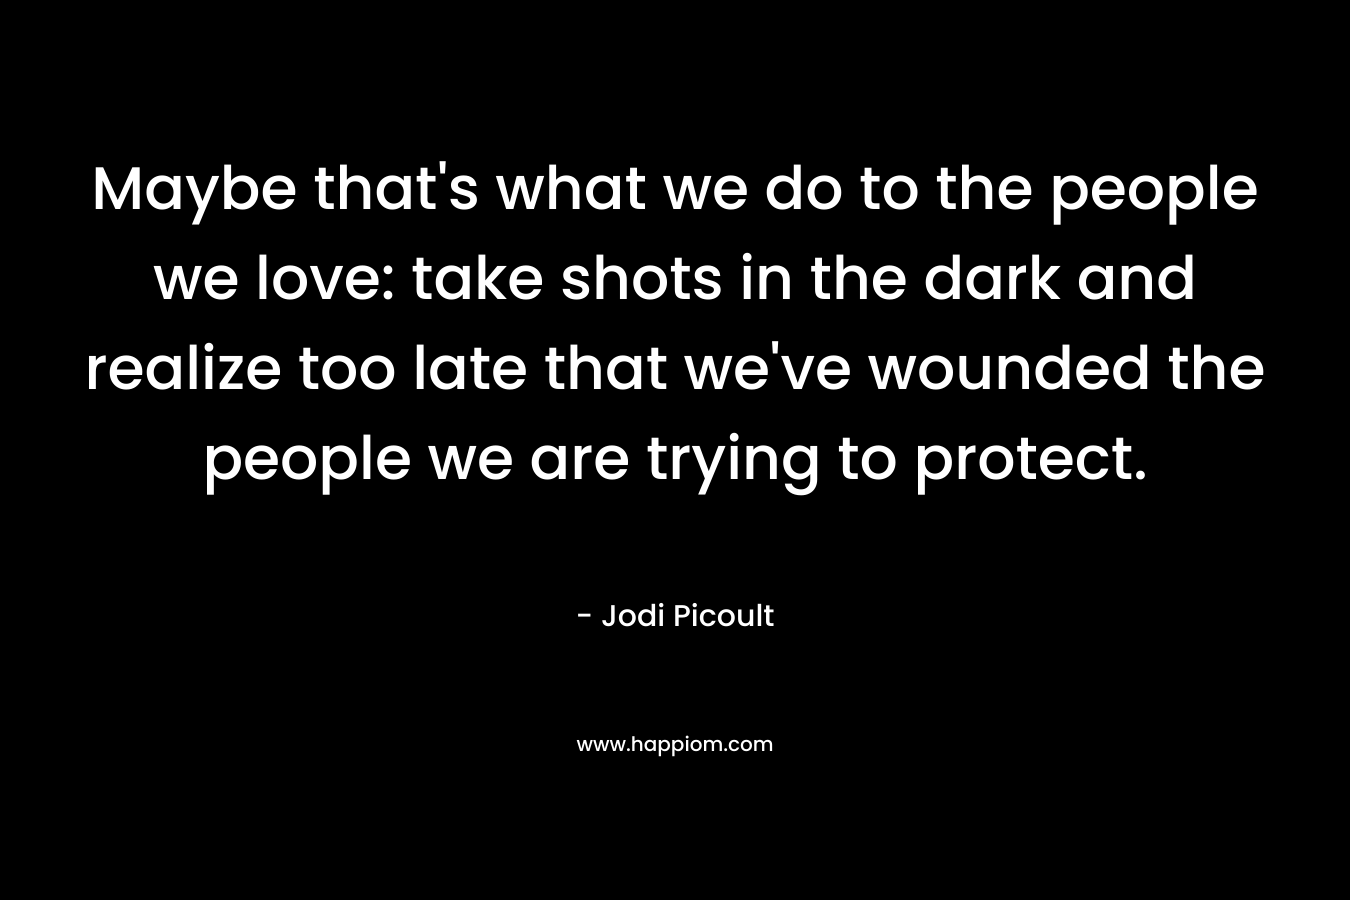 Maybe that's what we do to the people we love: take shots in the dark and realize too late that we've wounded the people we are trying to protect.